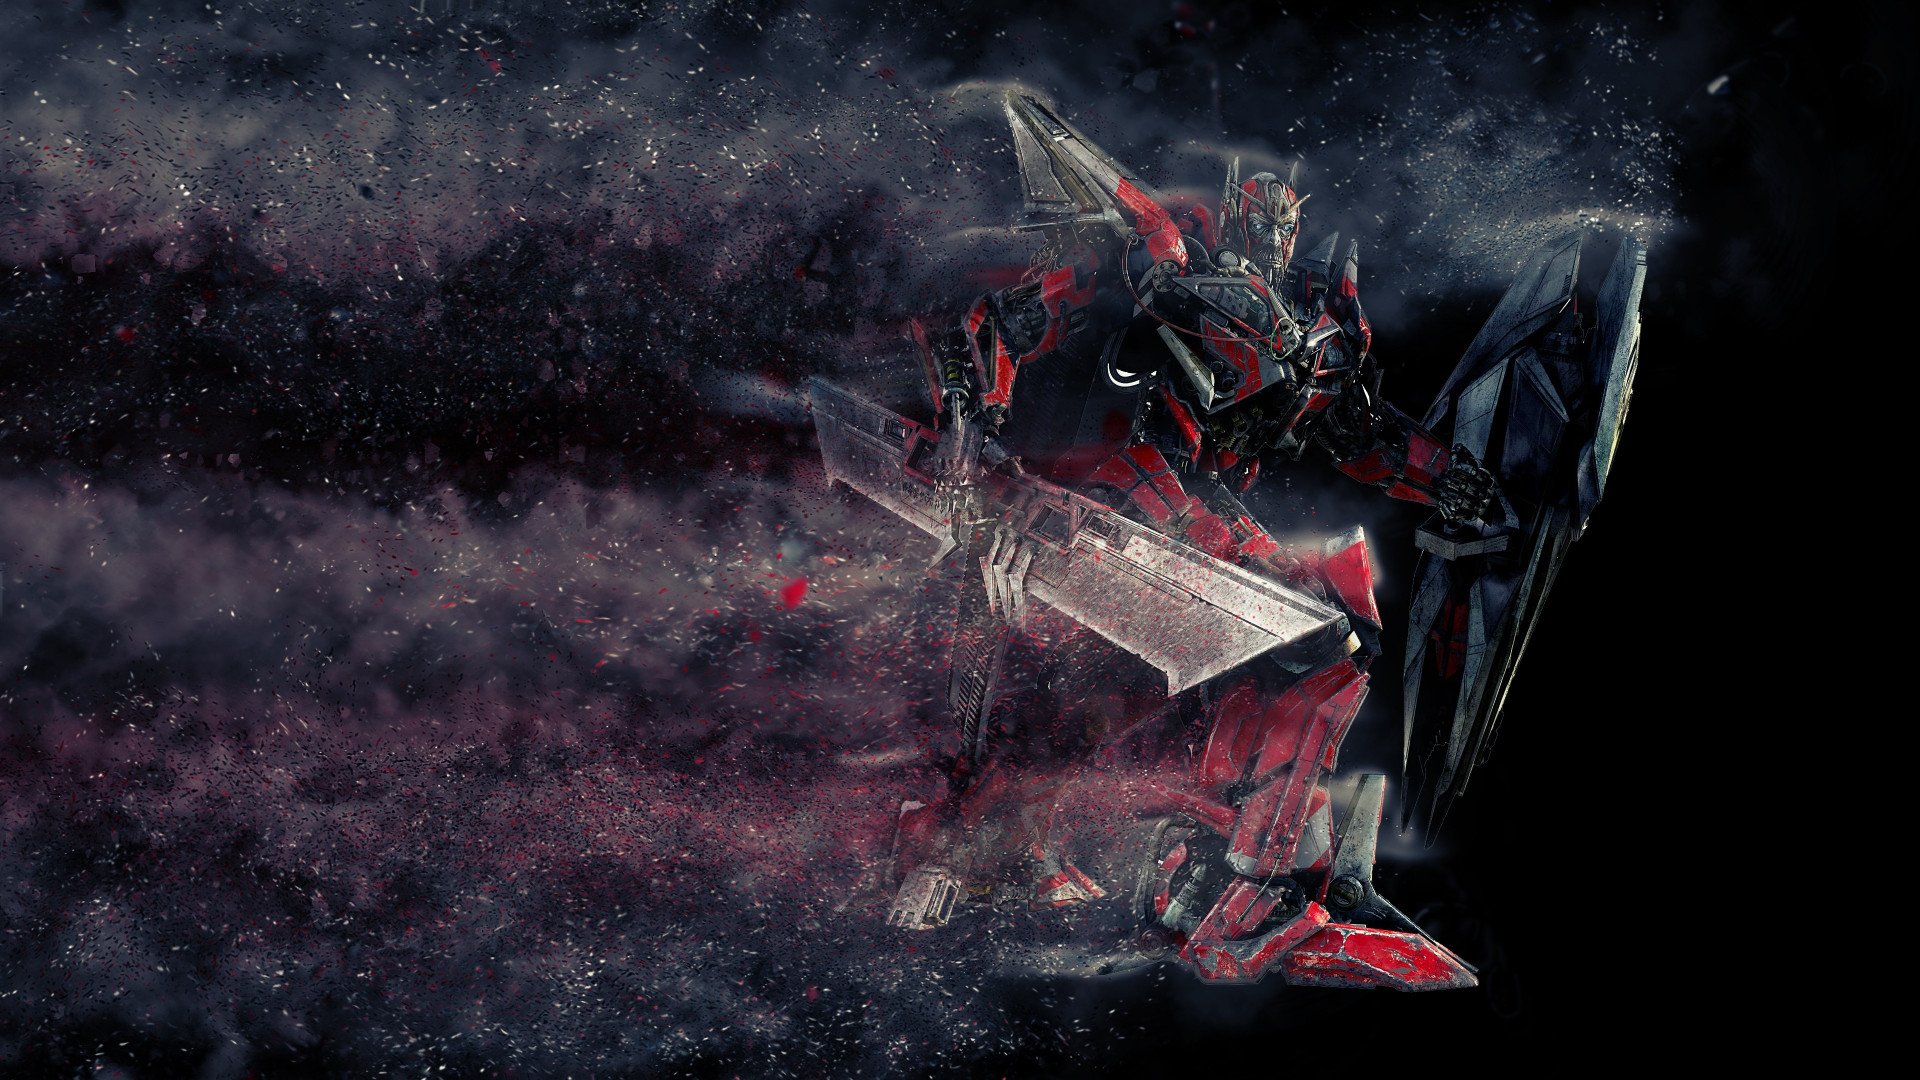 Sentinel Prime from Transformers wallpaper 1920x1080